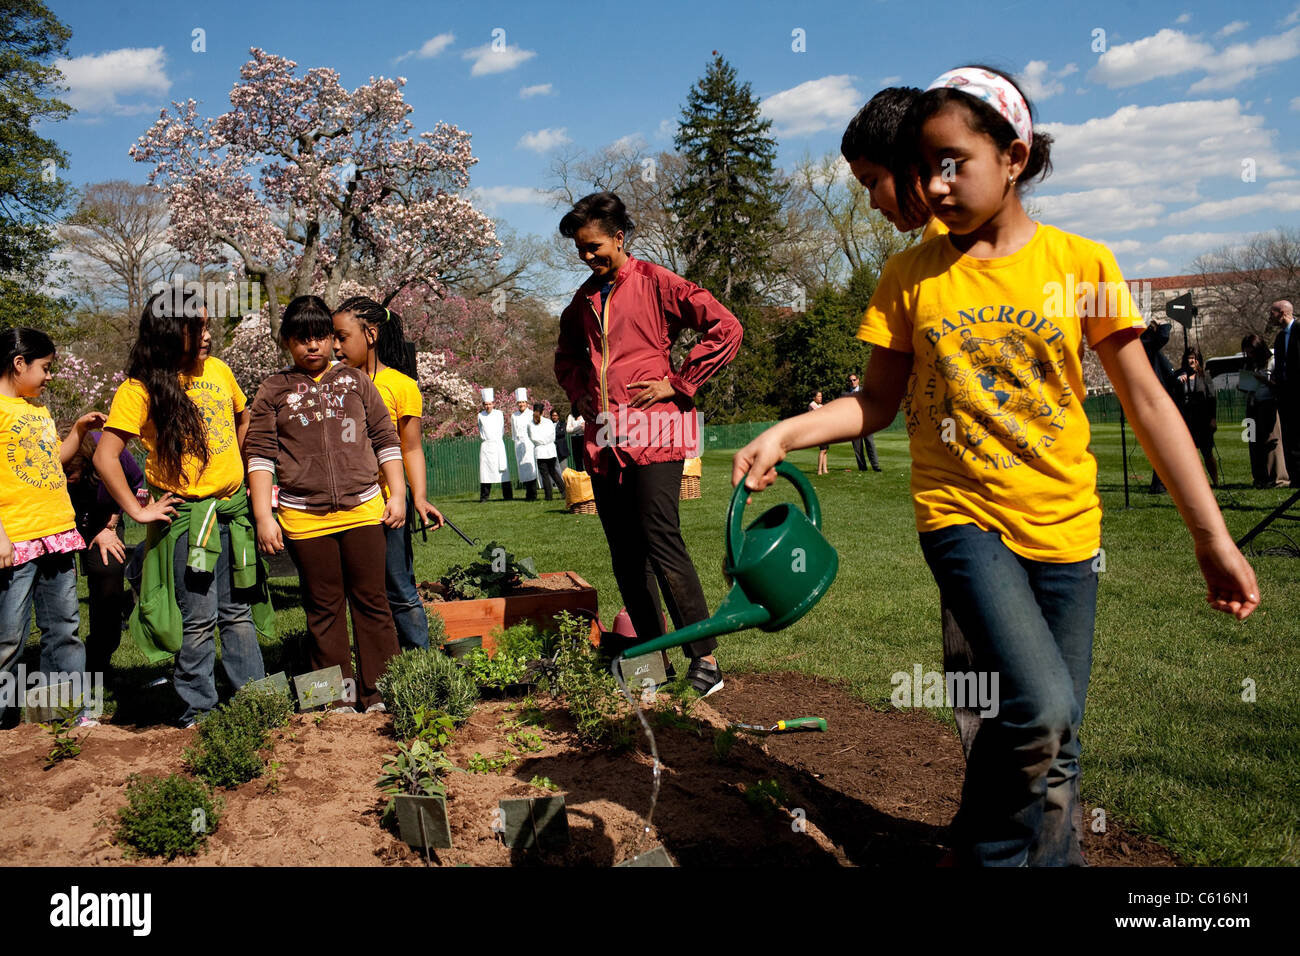 Children from Bancroft Elementary School help First Lady Michelle Obama plant the White House Vegetable Garden April 9 2009., Photo by: Everett Collection(BSLOC 2011 7 74) Stock Photo